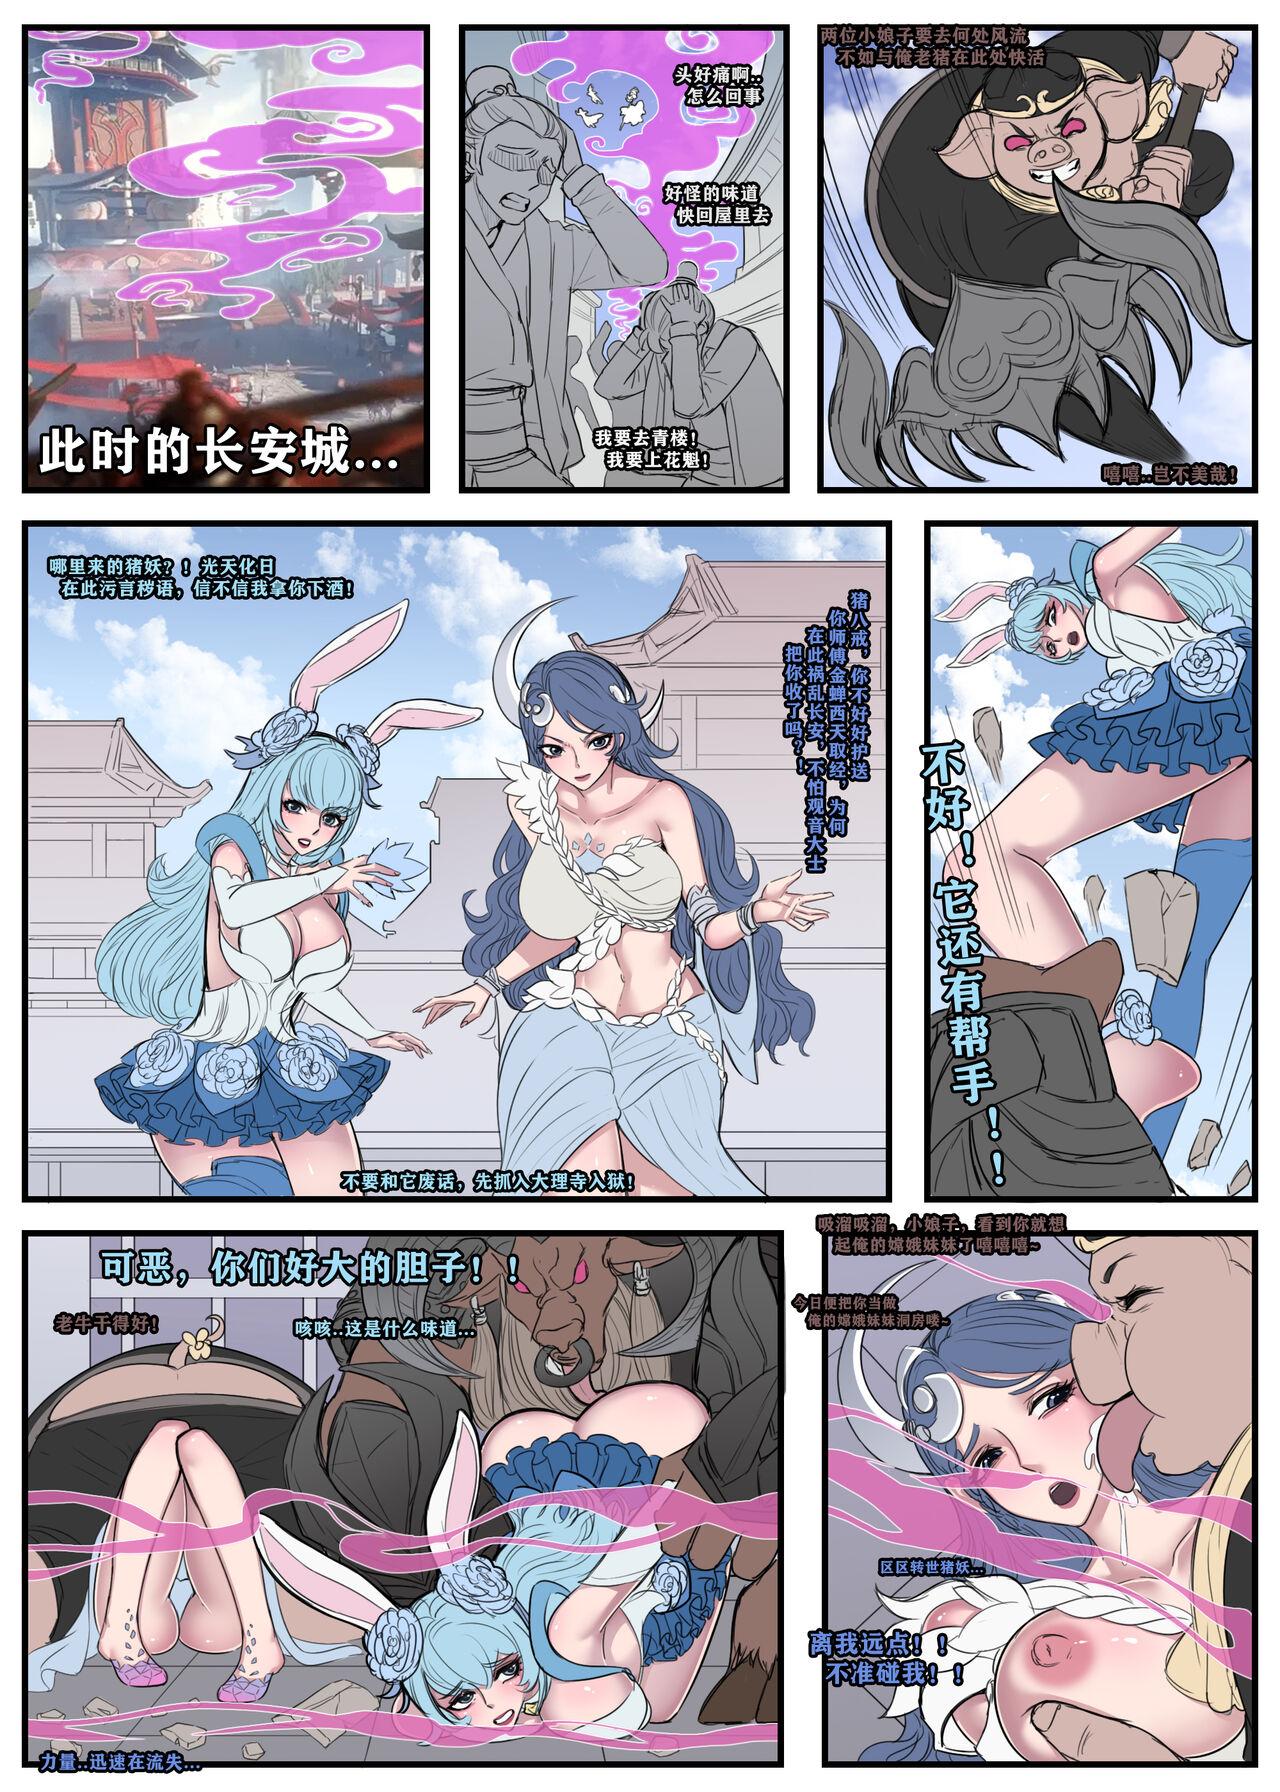 Double 王者荣耀-长安之乱 - Arena of valor Made - Page 4